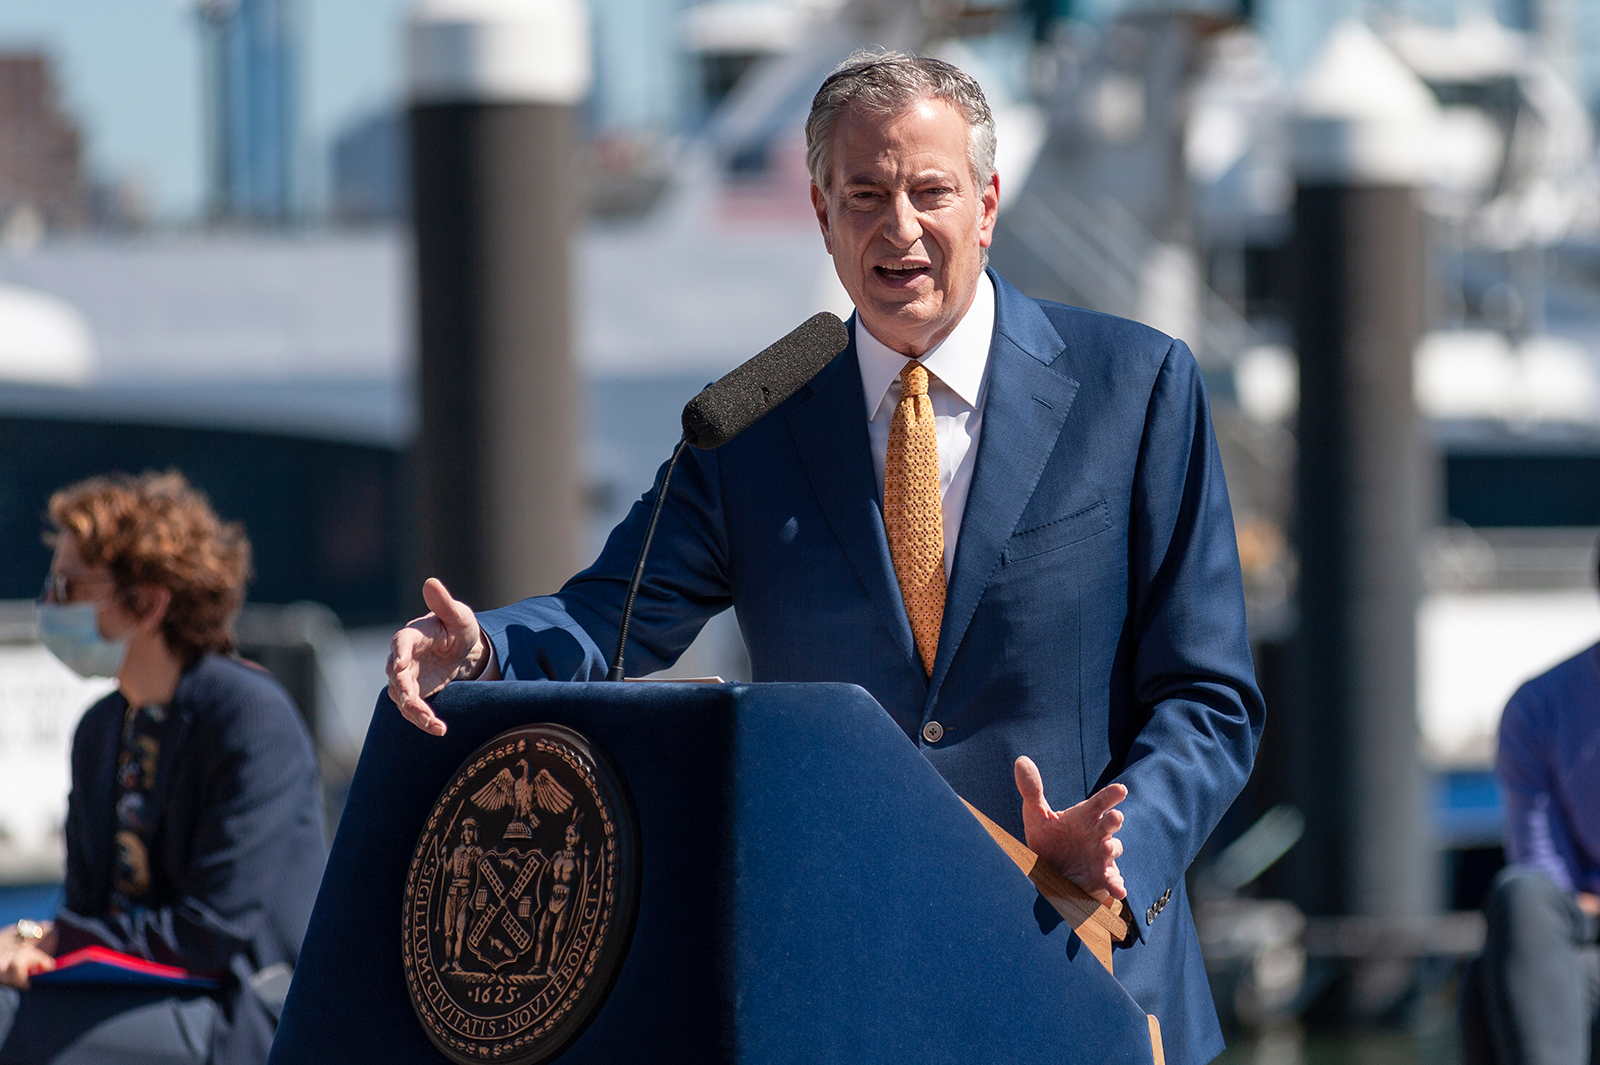 Mayor Bill de Blasio speaks at a press conference at the Brooklyn Navy Yards in Brooklyn, New York, on Monday, June 8.